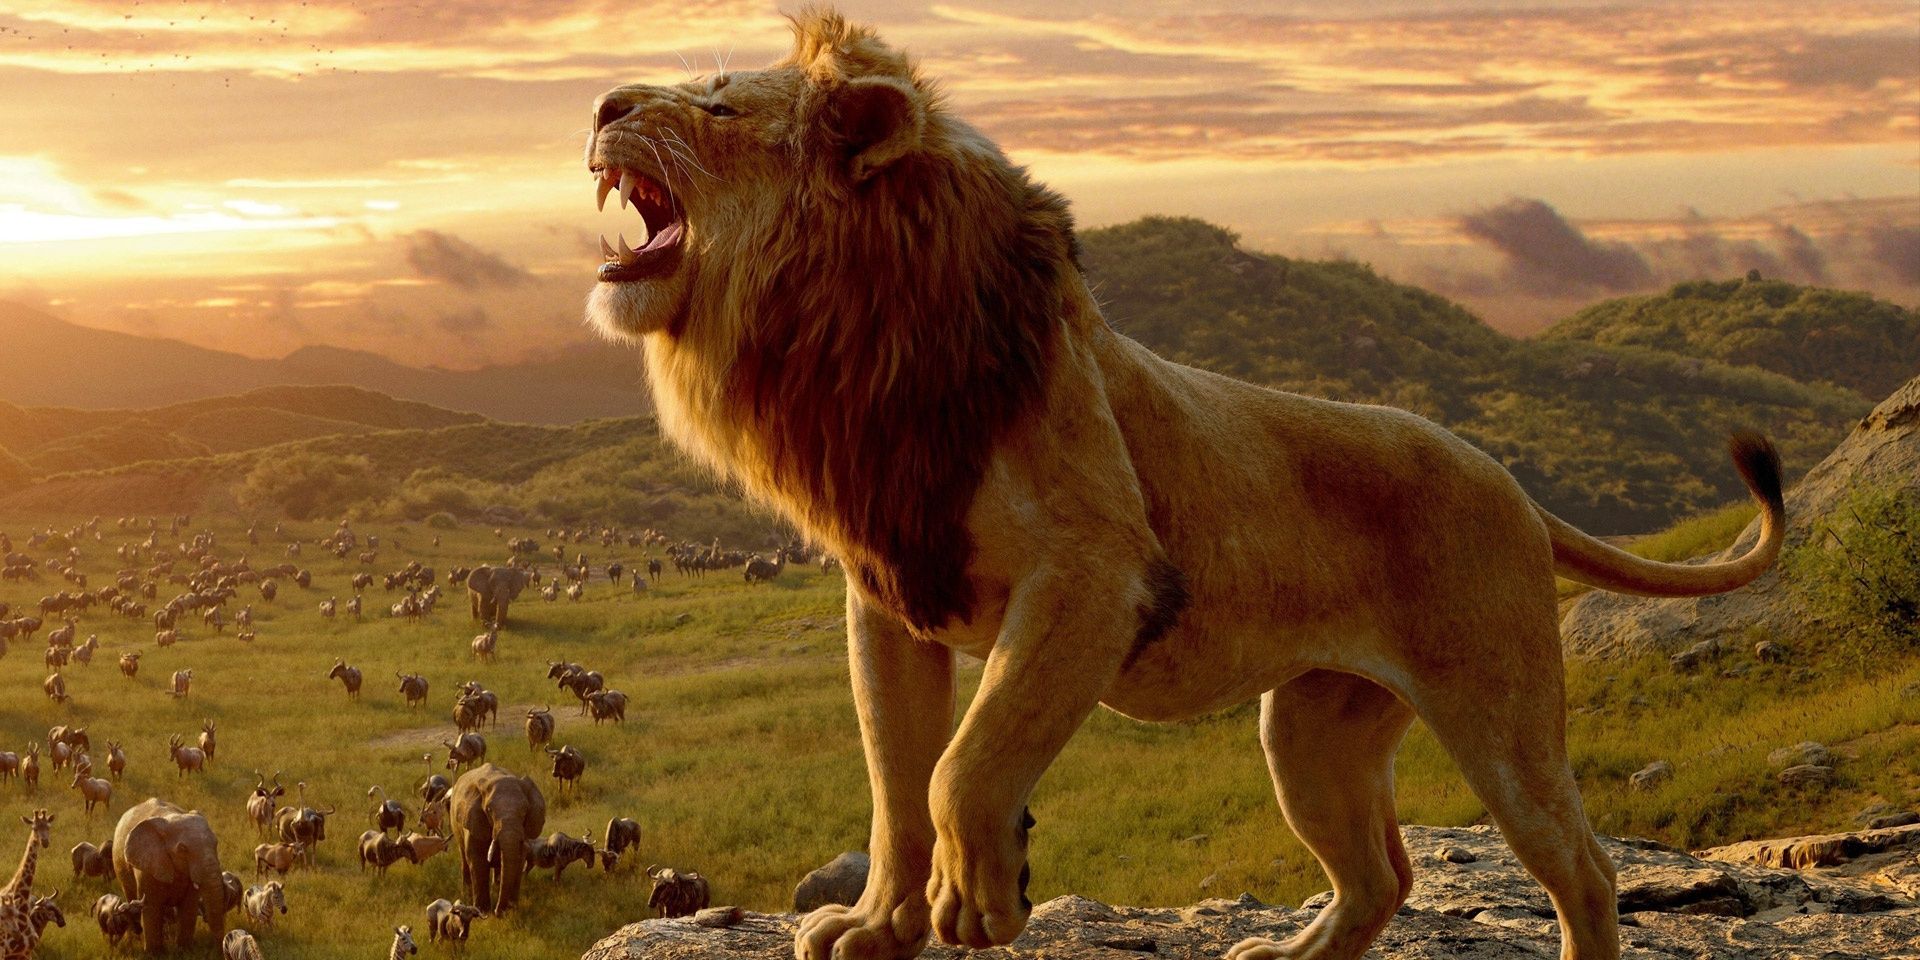 The Lion King images from 2019